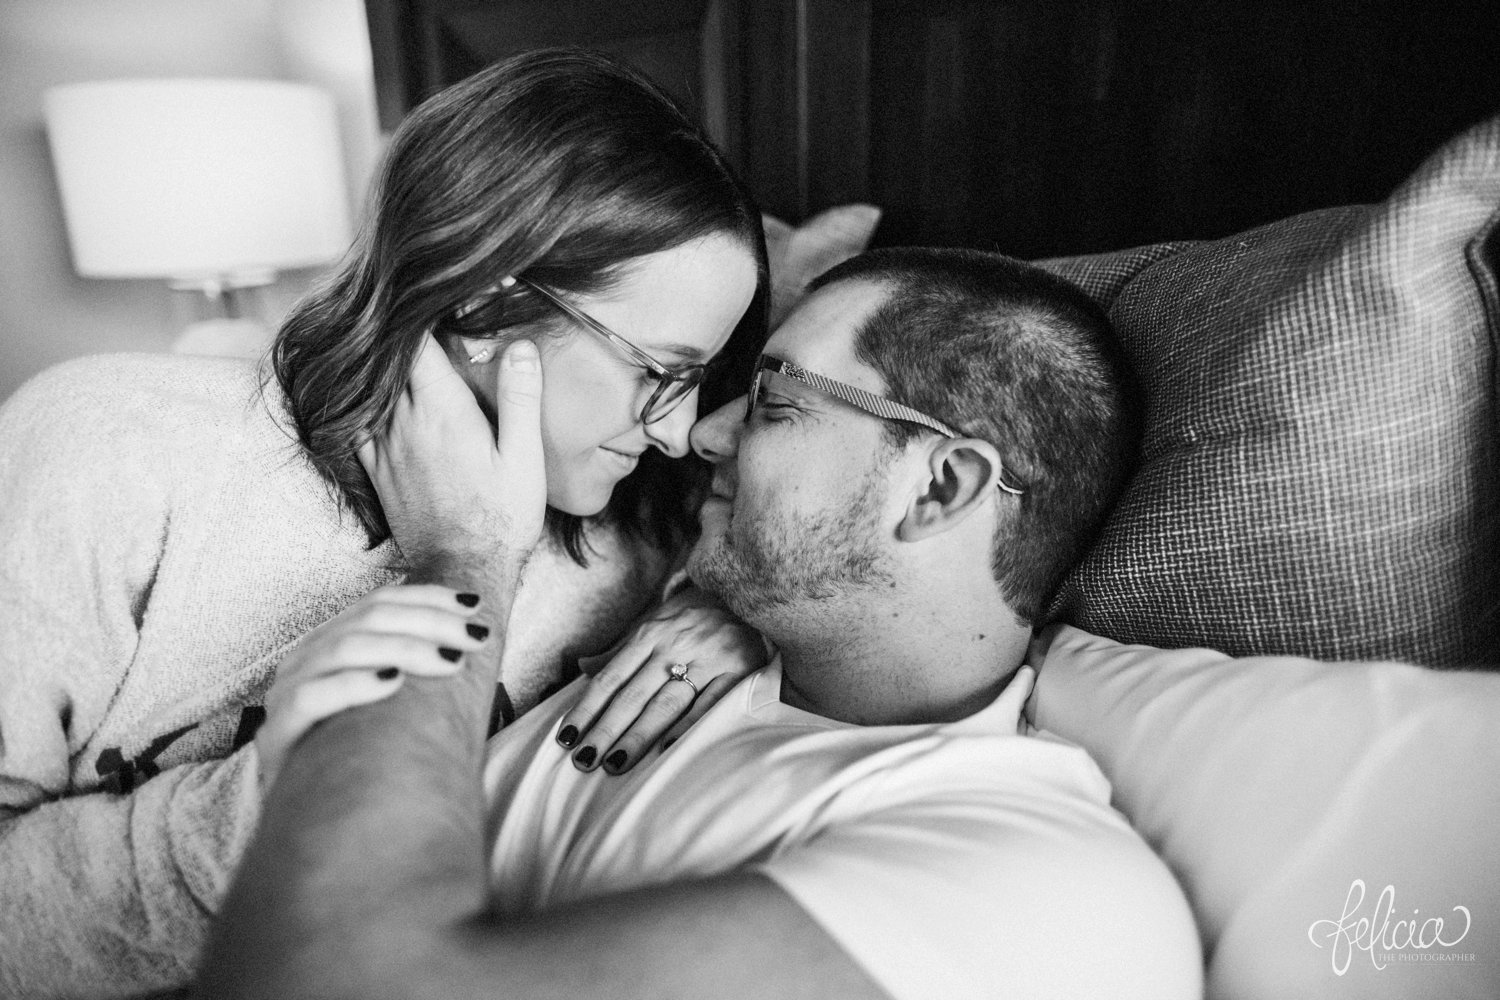 images by feliciathephotographer.com | destination photographer | engagement session | in home | lifestyle | kansas city | cozy | bed | jammies | snuggles | laughter | natural light | love | romantic | casual | black and white | 